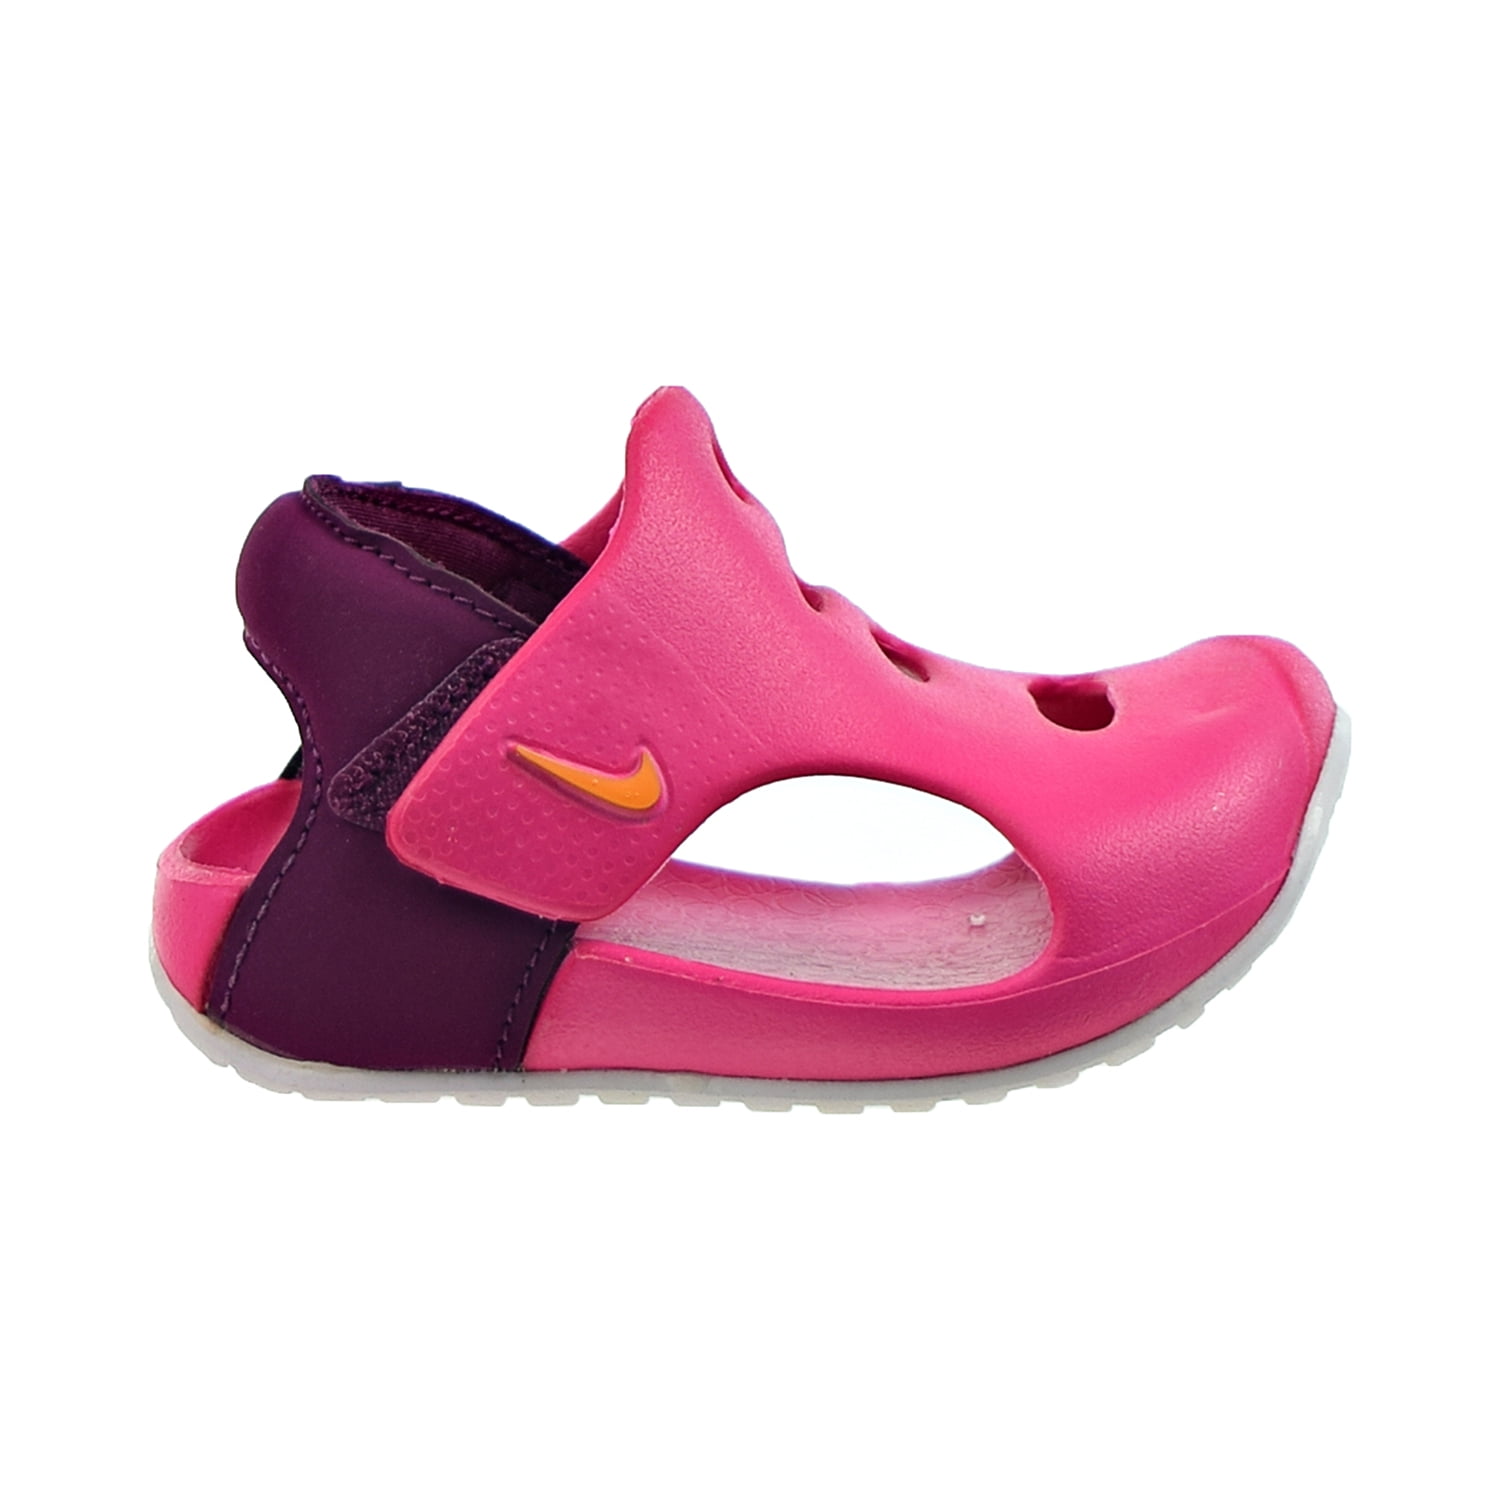 Sunray Protect 3 (TD) Sandals Pink dh9465-602 - Walmart.com